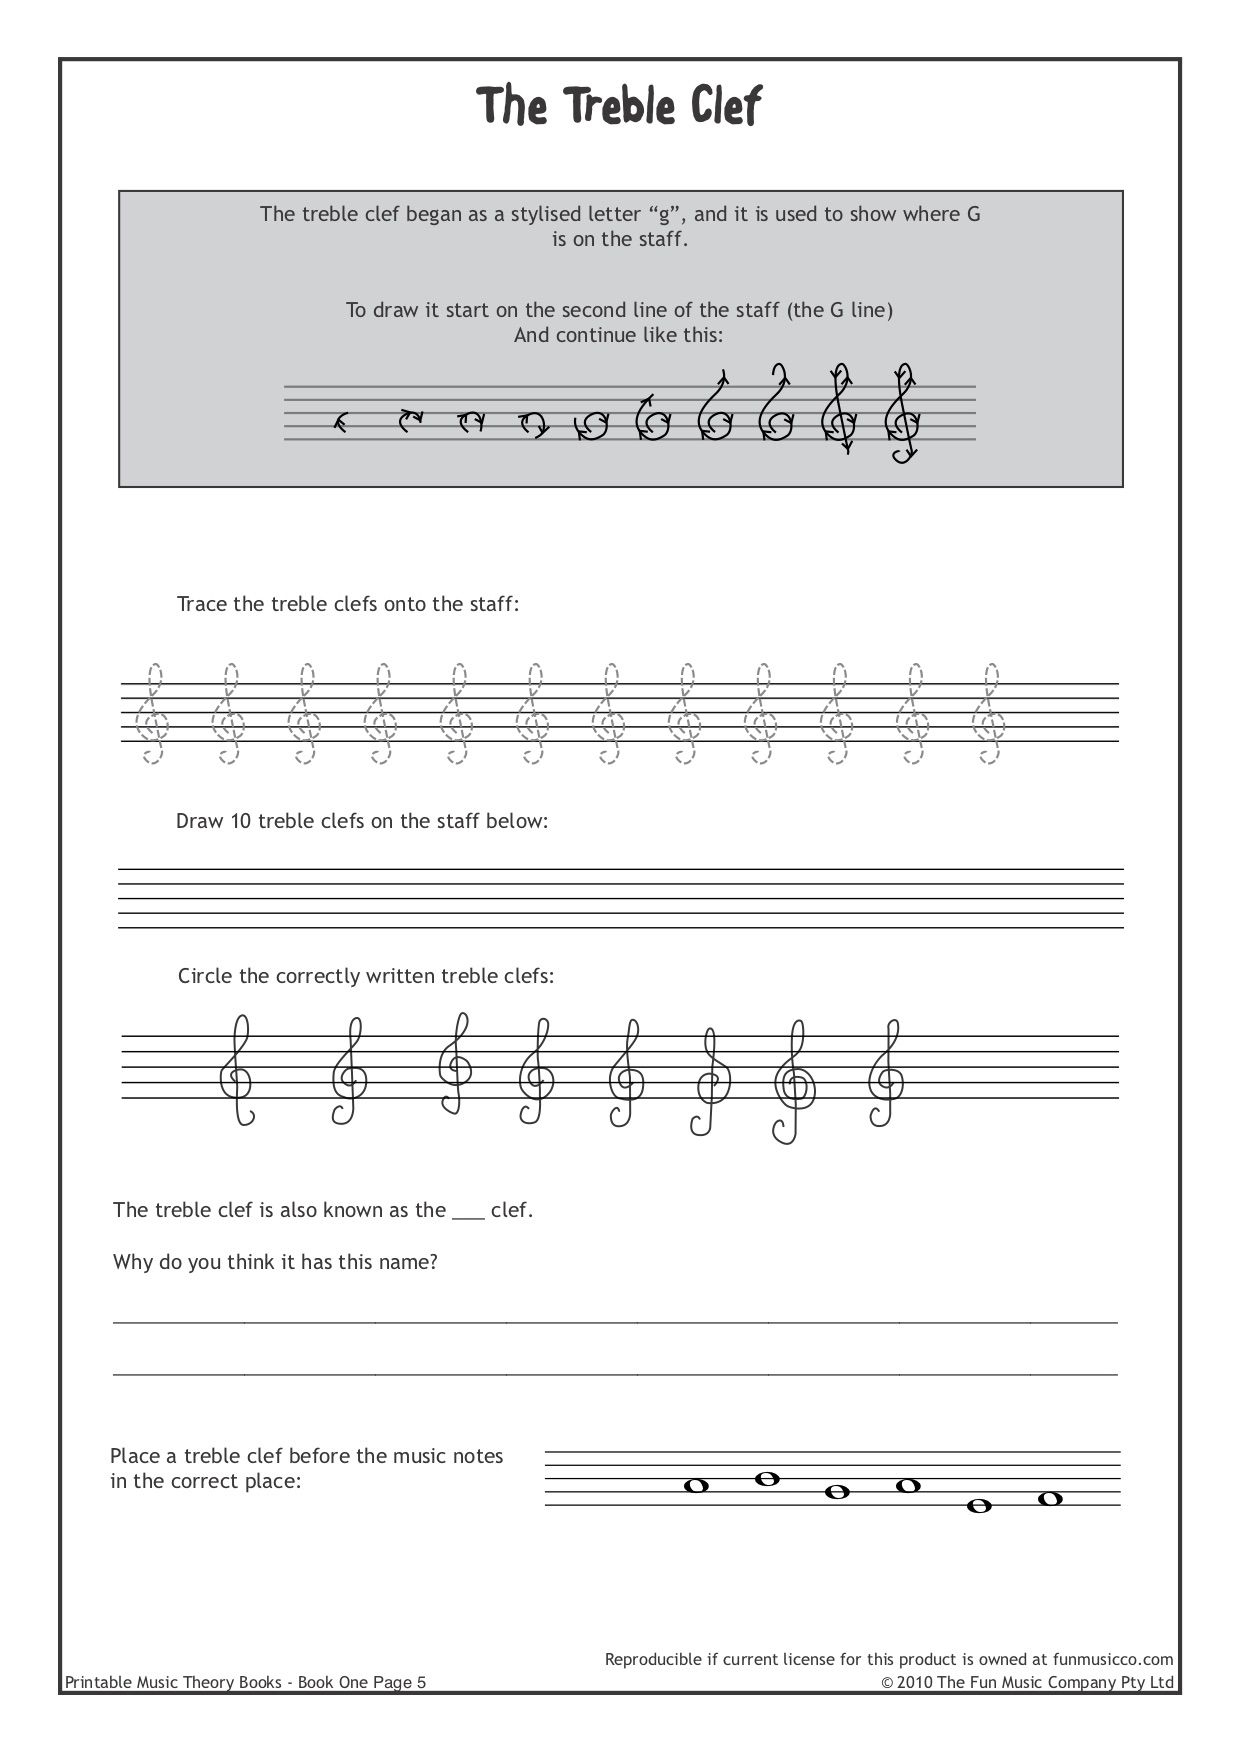 Downloadable Music Theory Worksheets At Funmusicco | Music | Free Printable Music Theory Worksheets